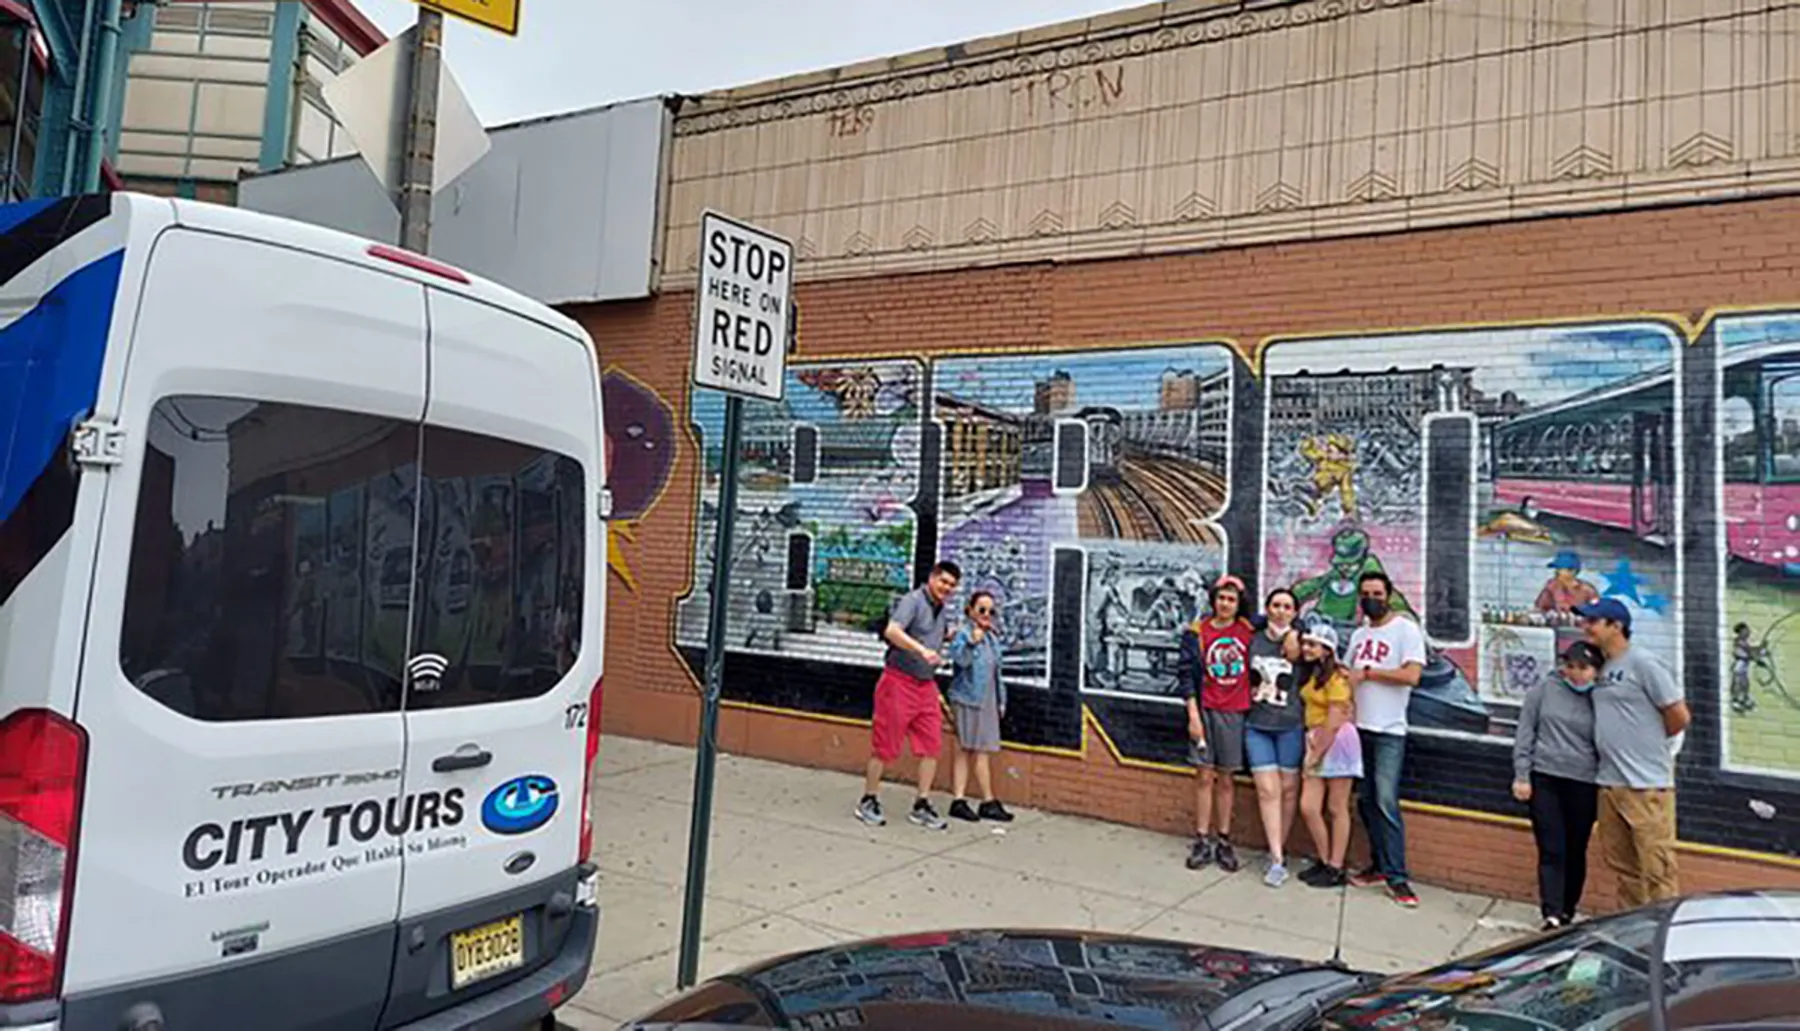 A group of people poses for a photo in front of a colorful urban mural while a city tour van is parked nearby.